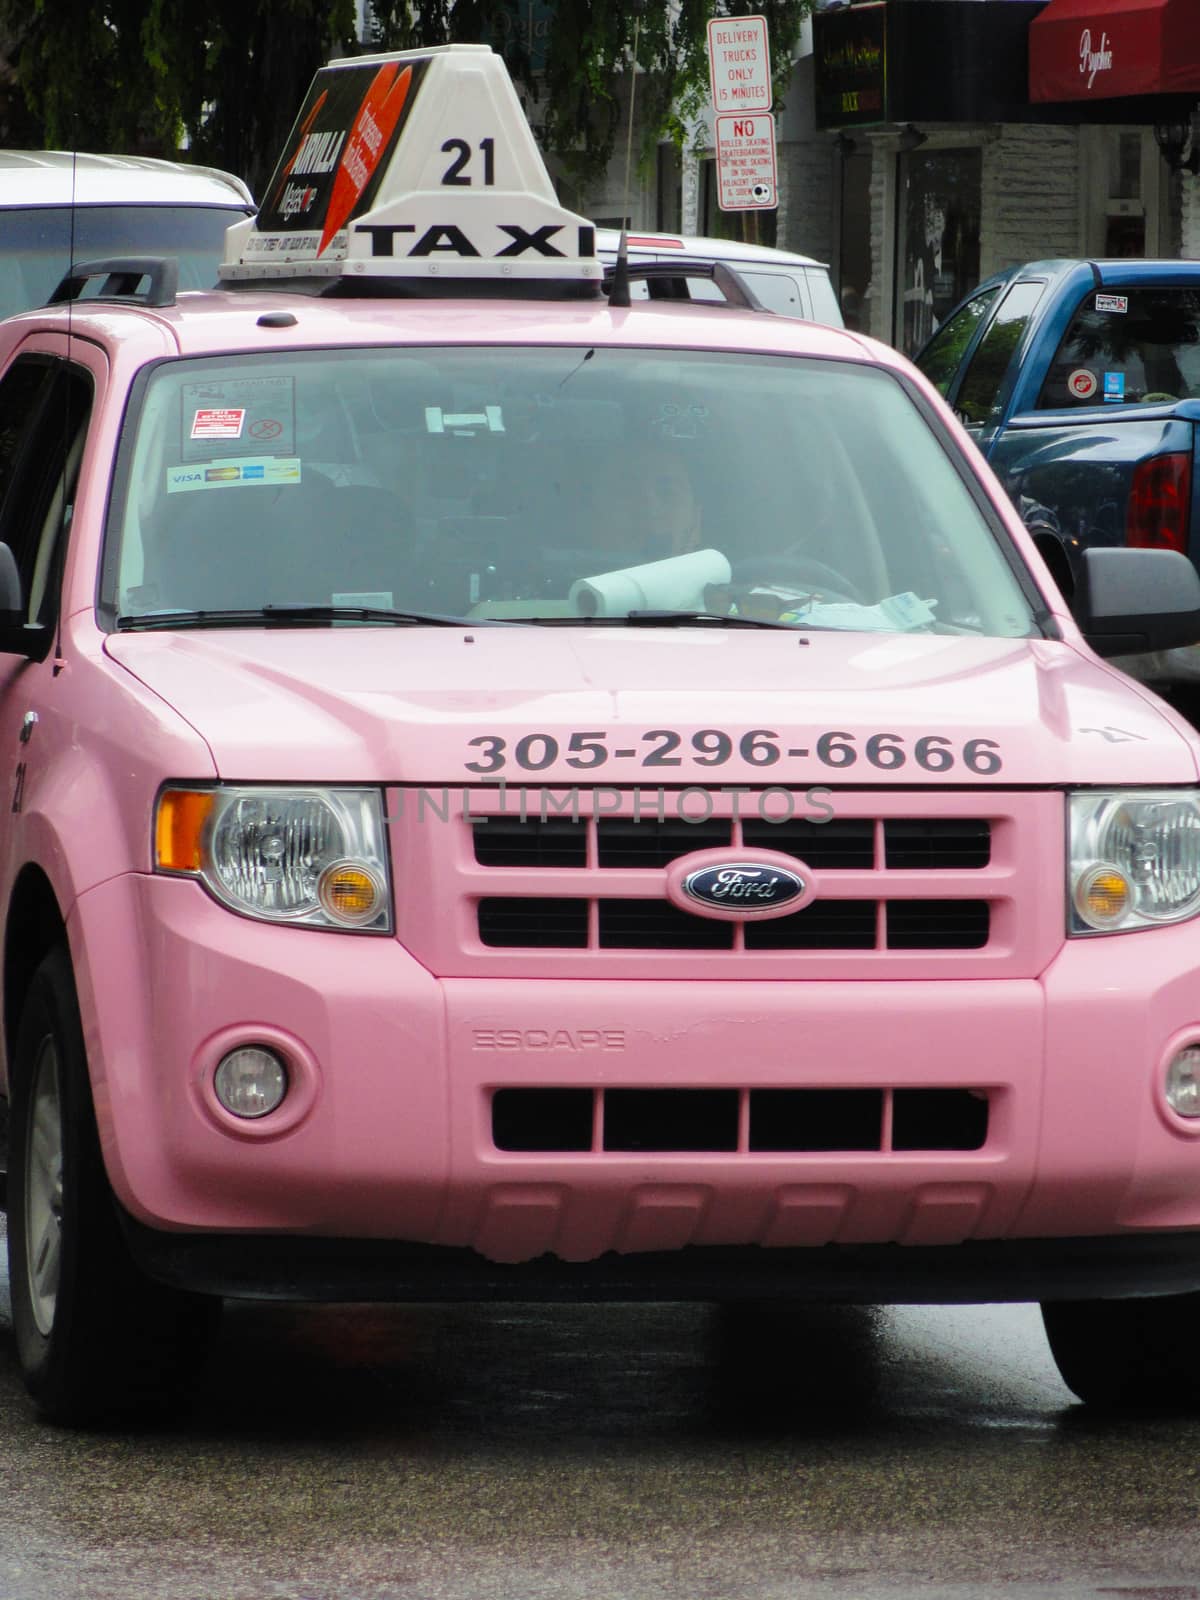 Ford Escape Pink Taxi by bensib